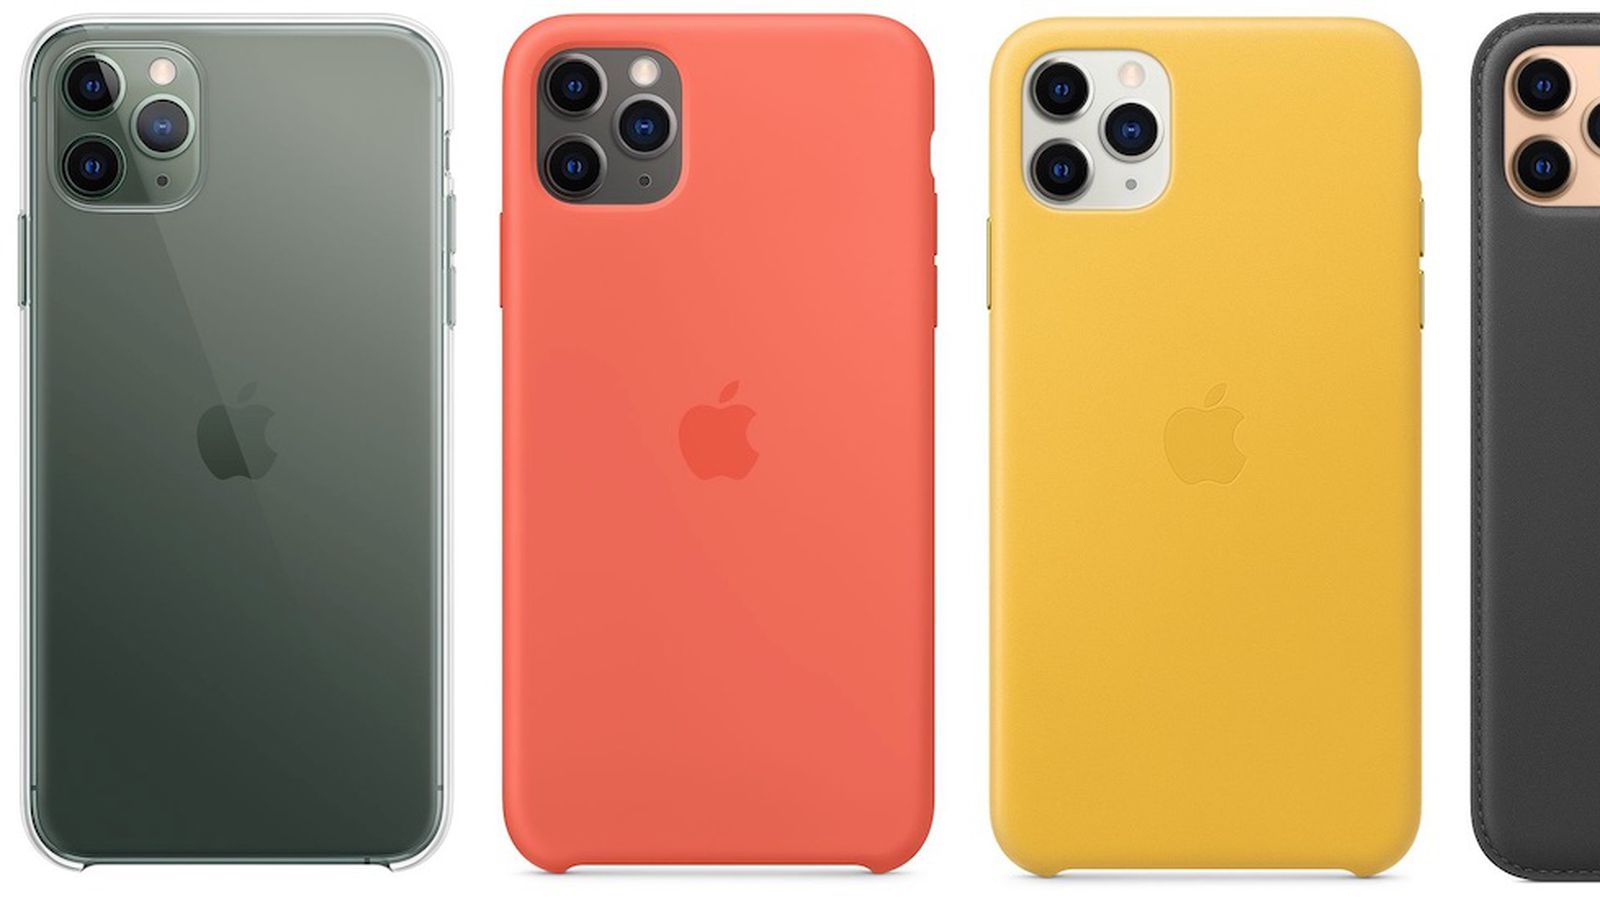 Apple Rolls Out New Cases For Iphone 11, 11 Pro, And 11 Pro Max - Macrumors